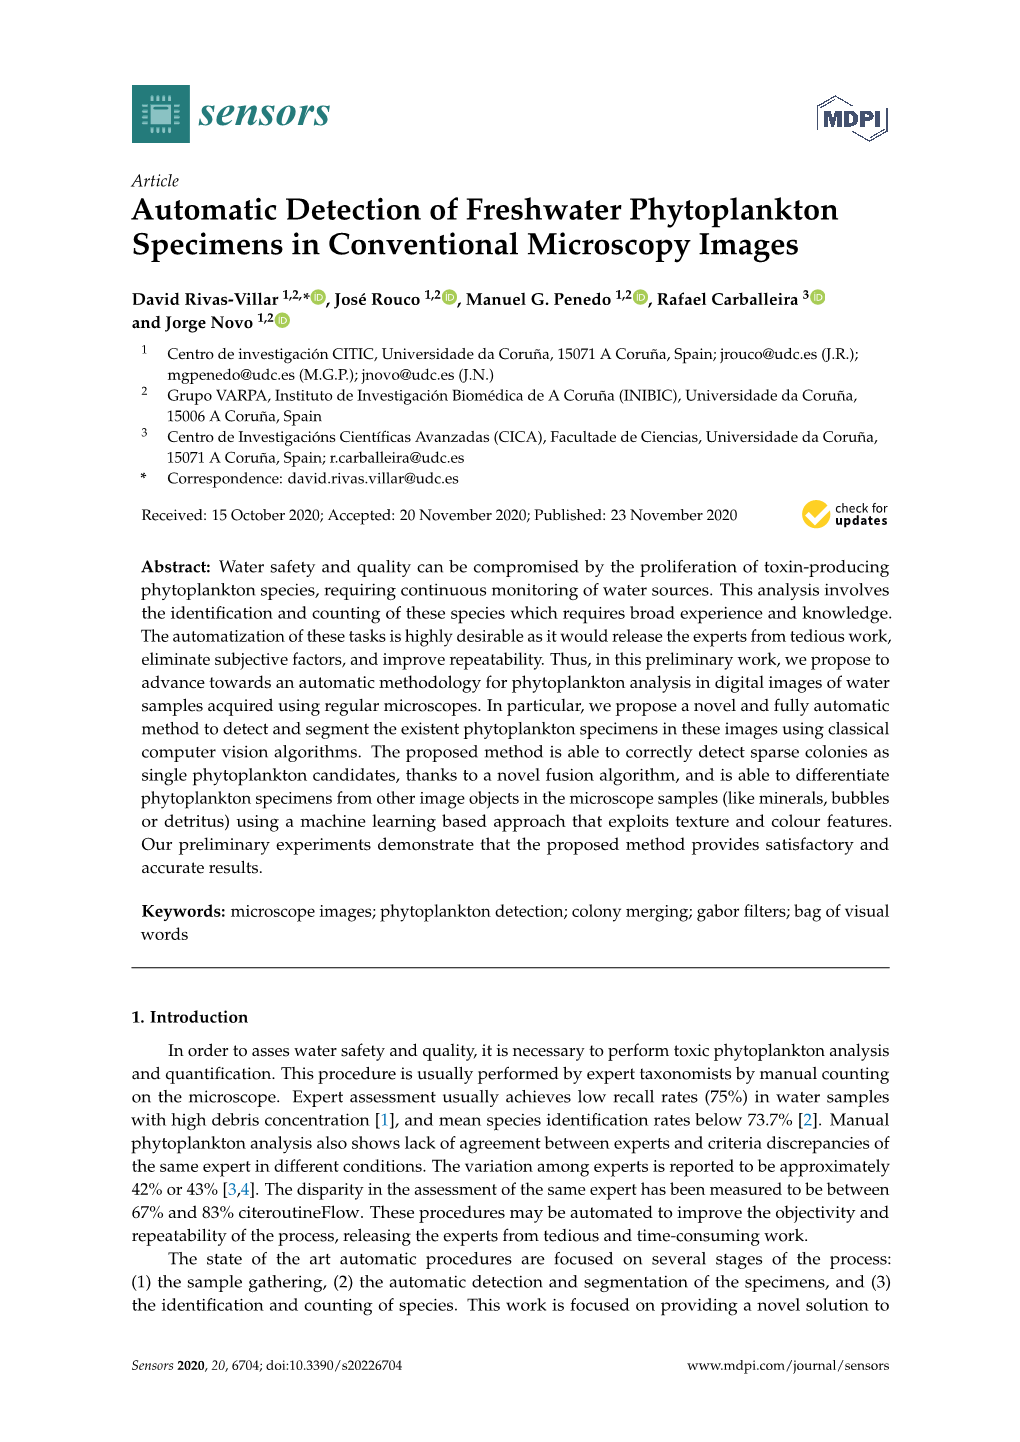 Automatic Detection of Freshwater Phytoplankton Specimens in Conventional Microscopy Images